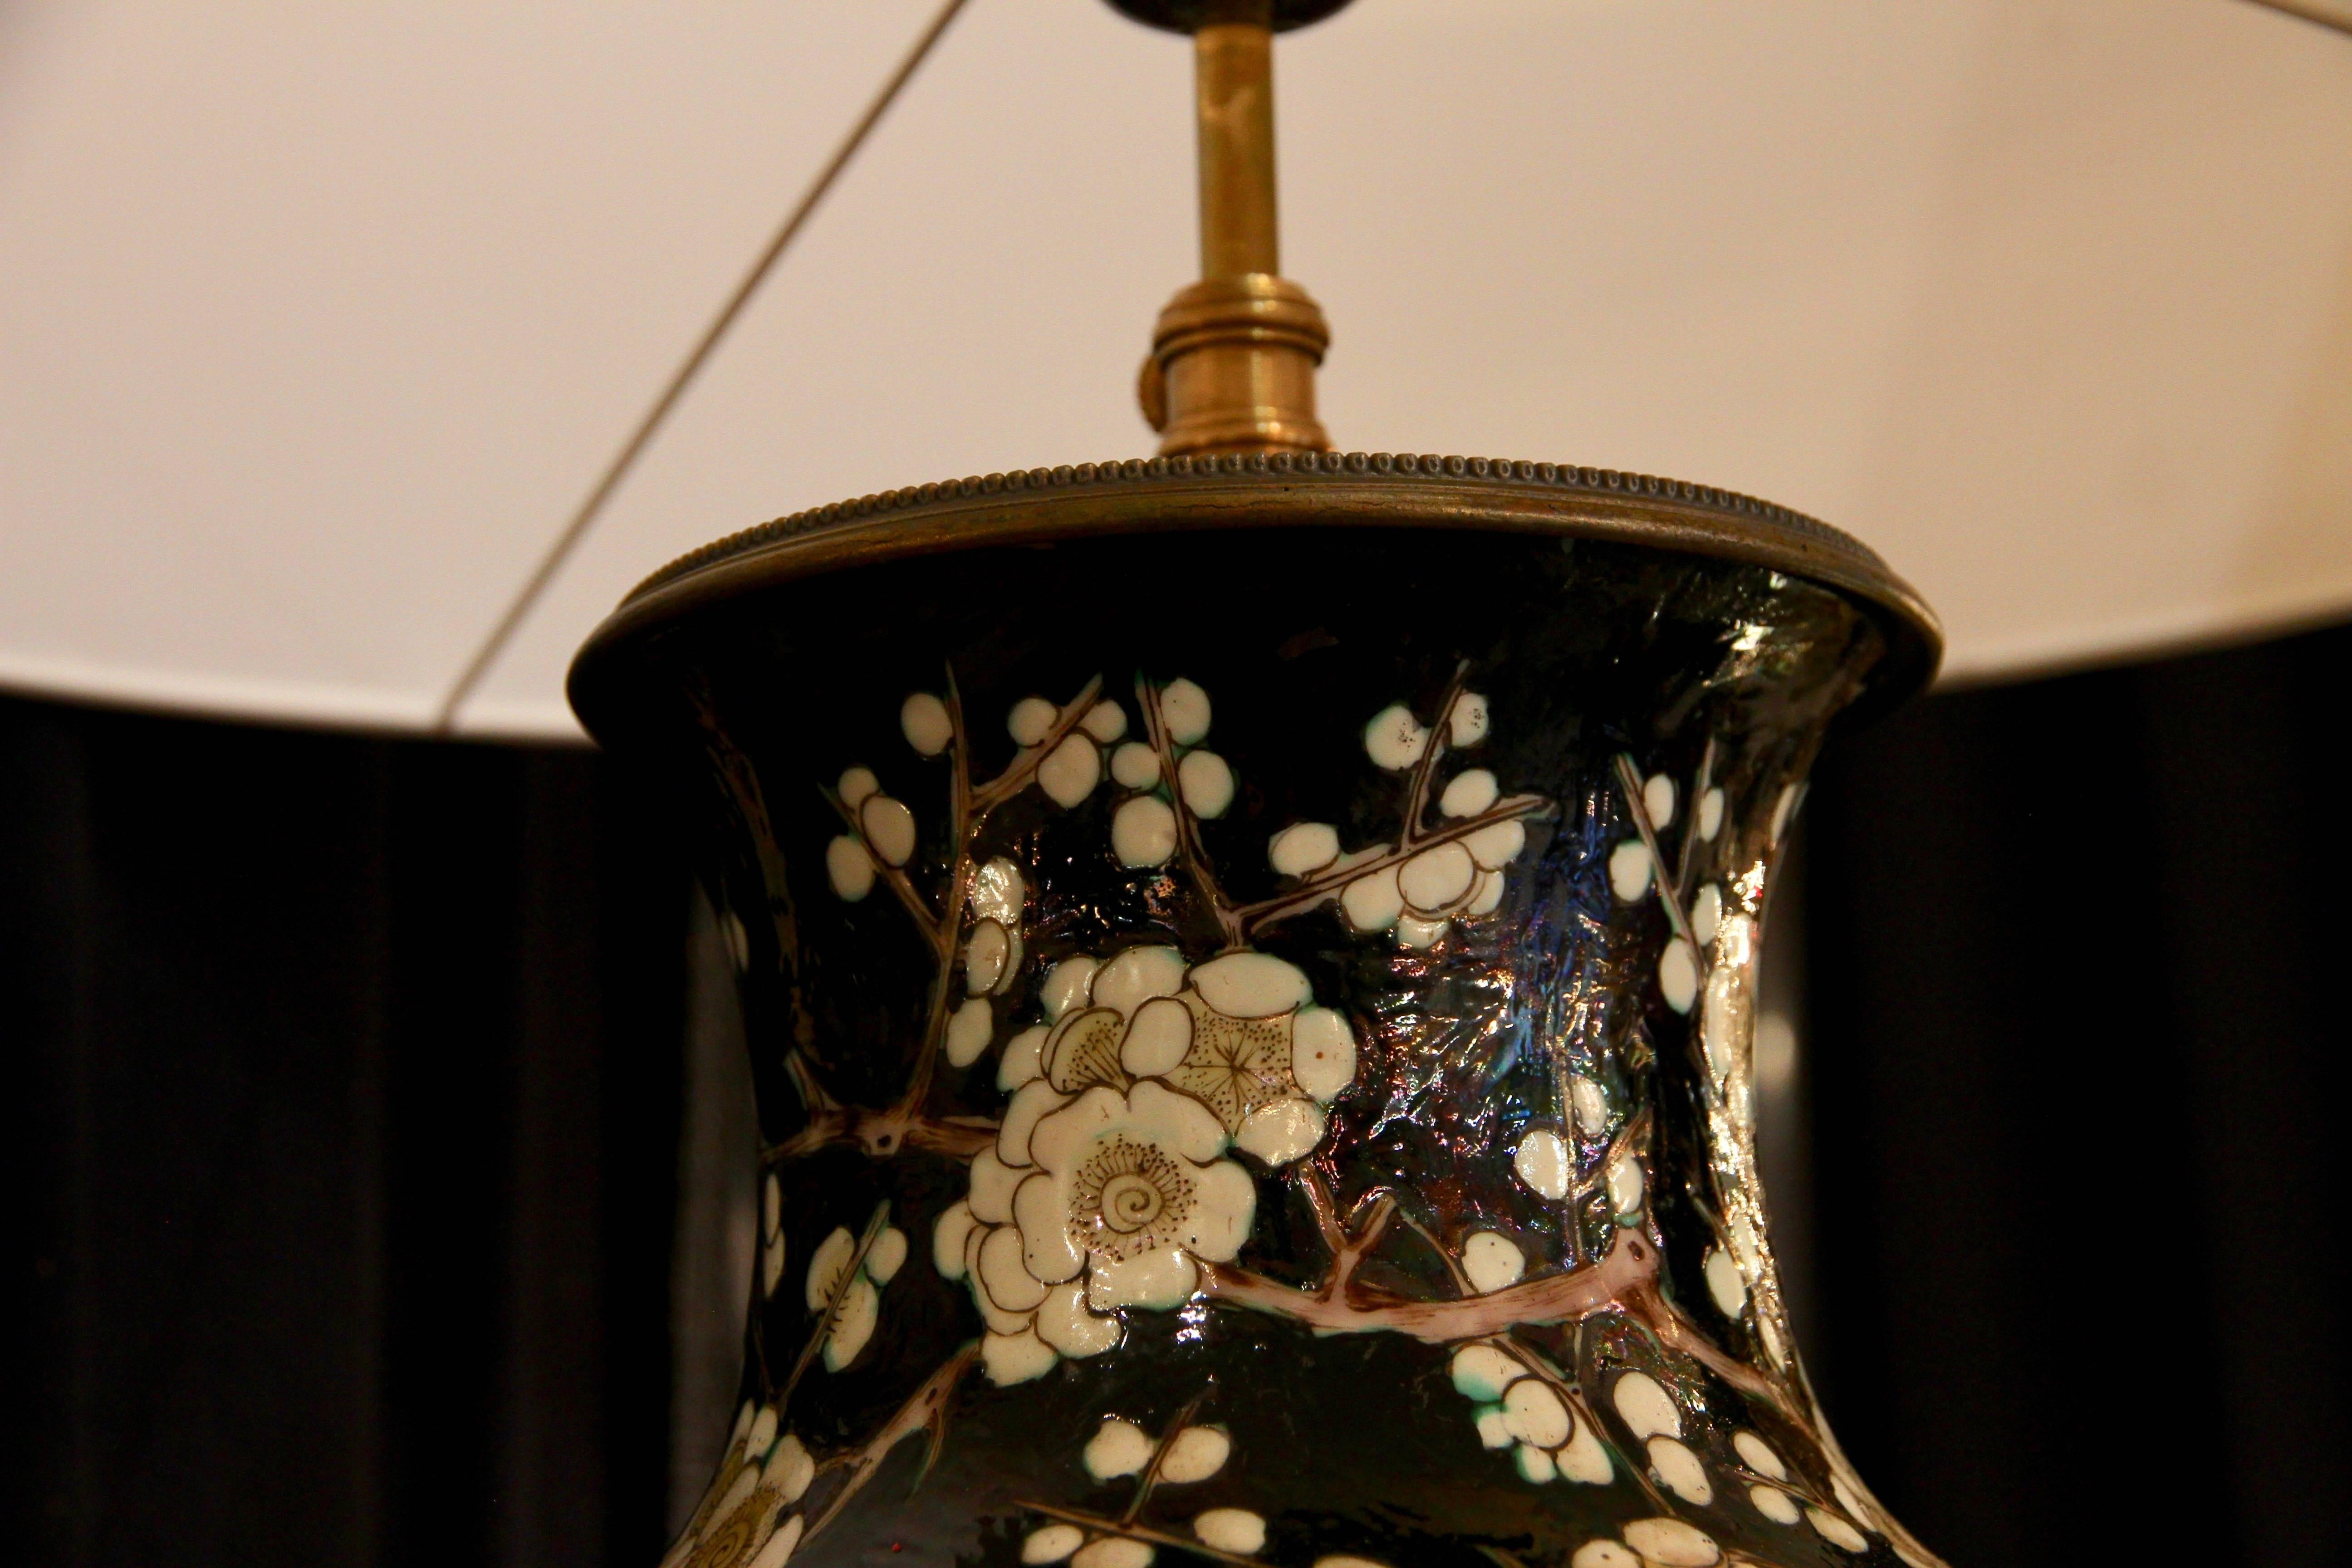 Chinese Vase Mounted in Lamp, Gilded Bronze, 19th Century Chinese Artwork For Sale 5